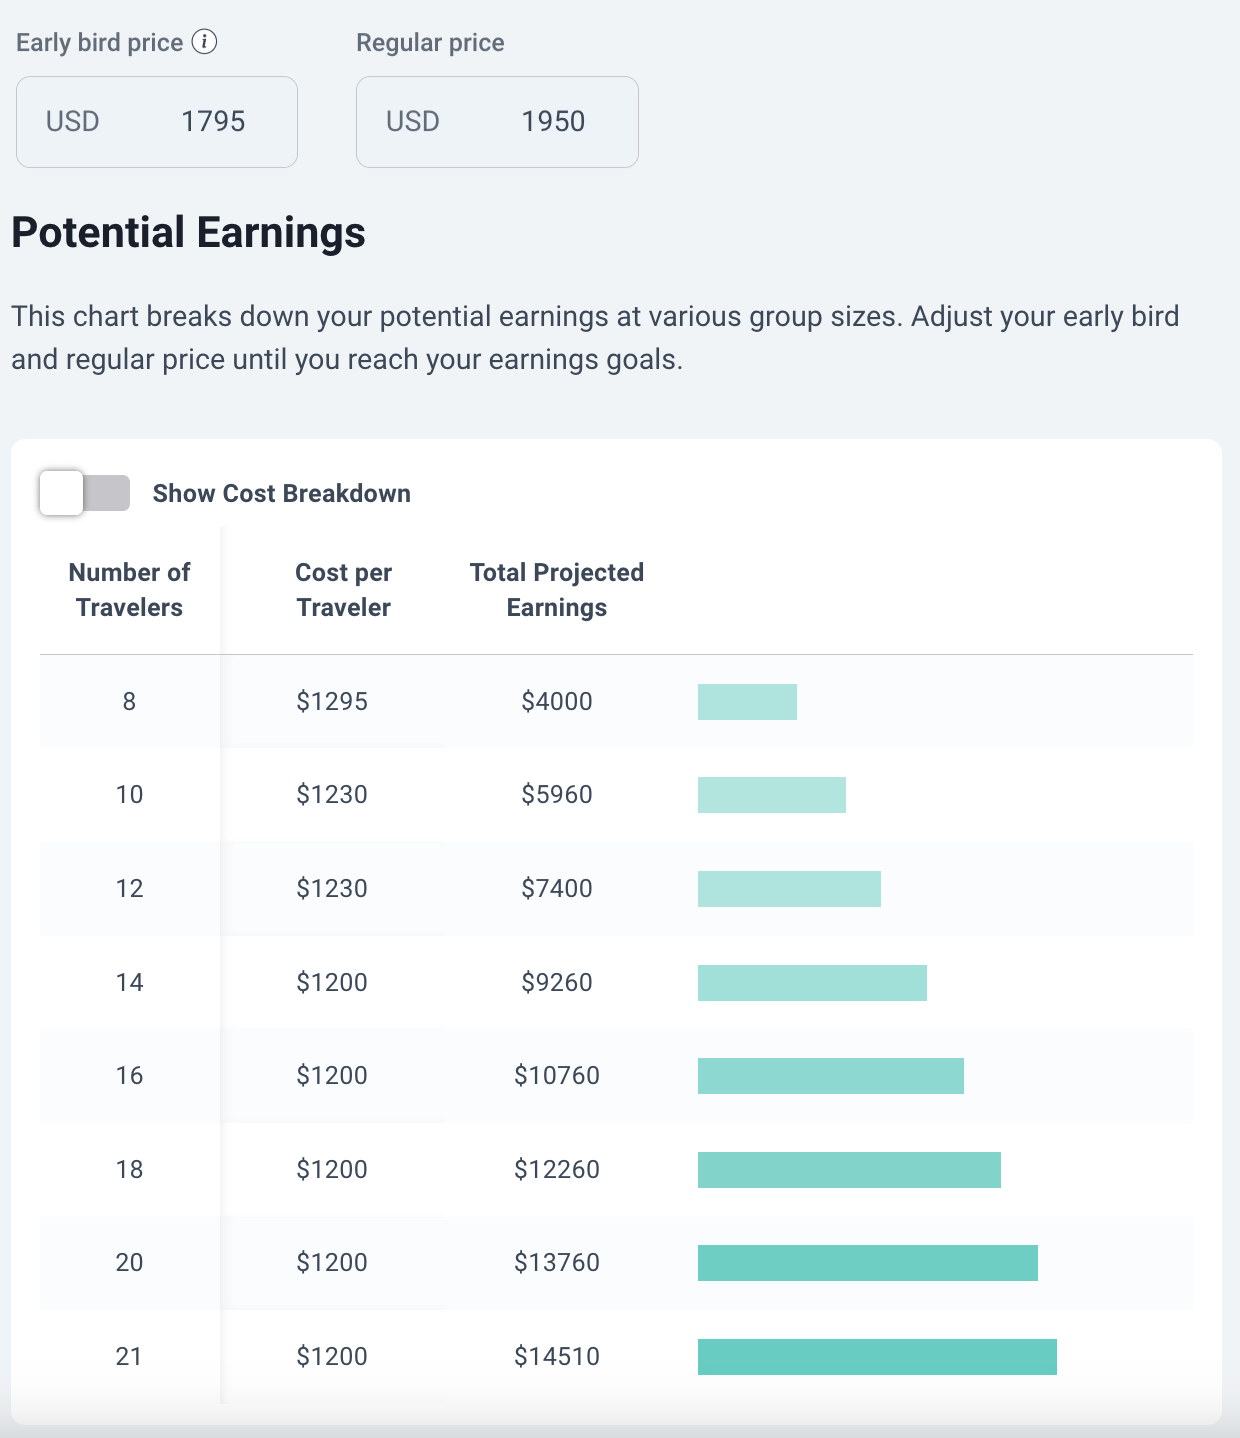 TrovaTrip's Host Portal Potential Earnings Calculator pricing example with early bird pricing.